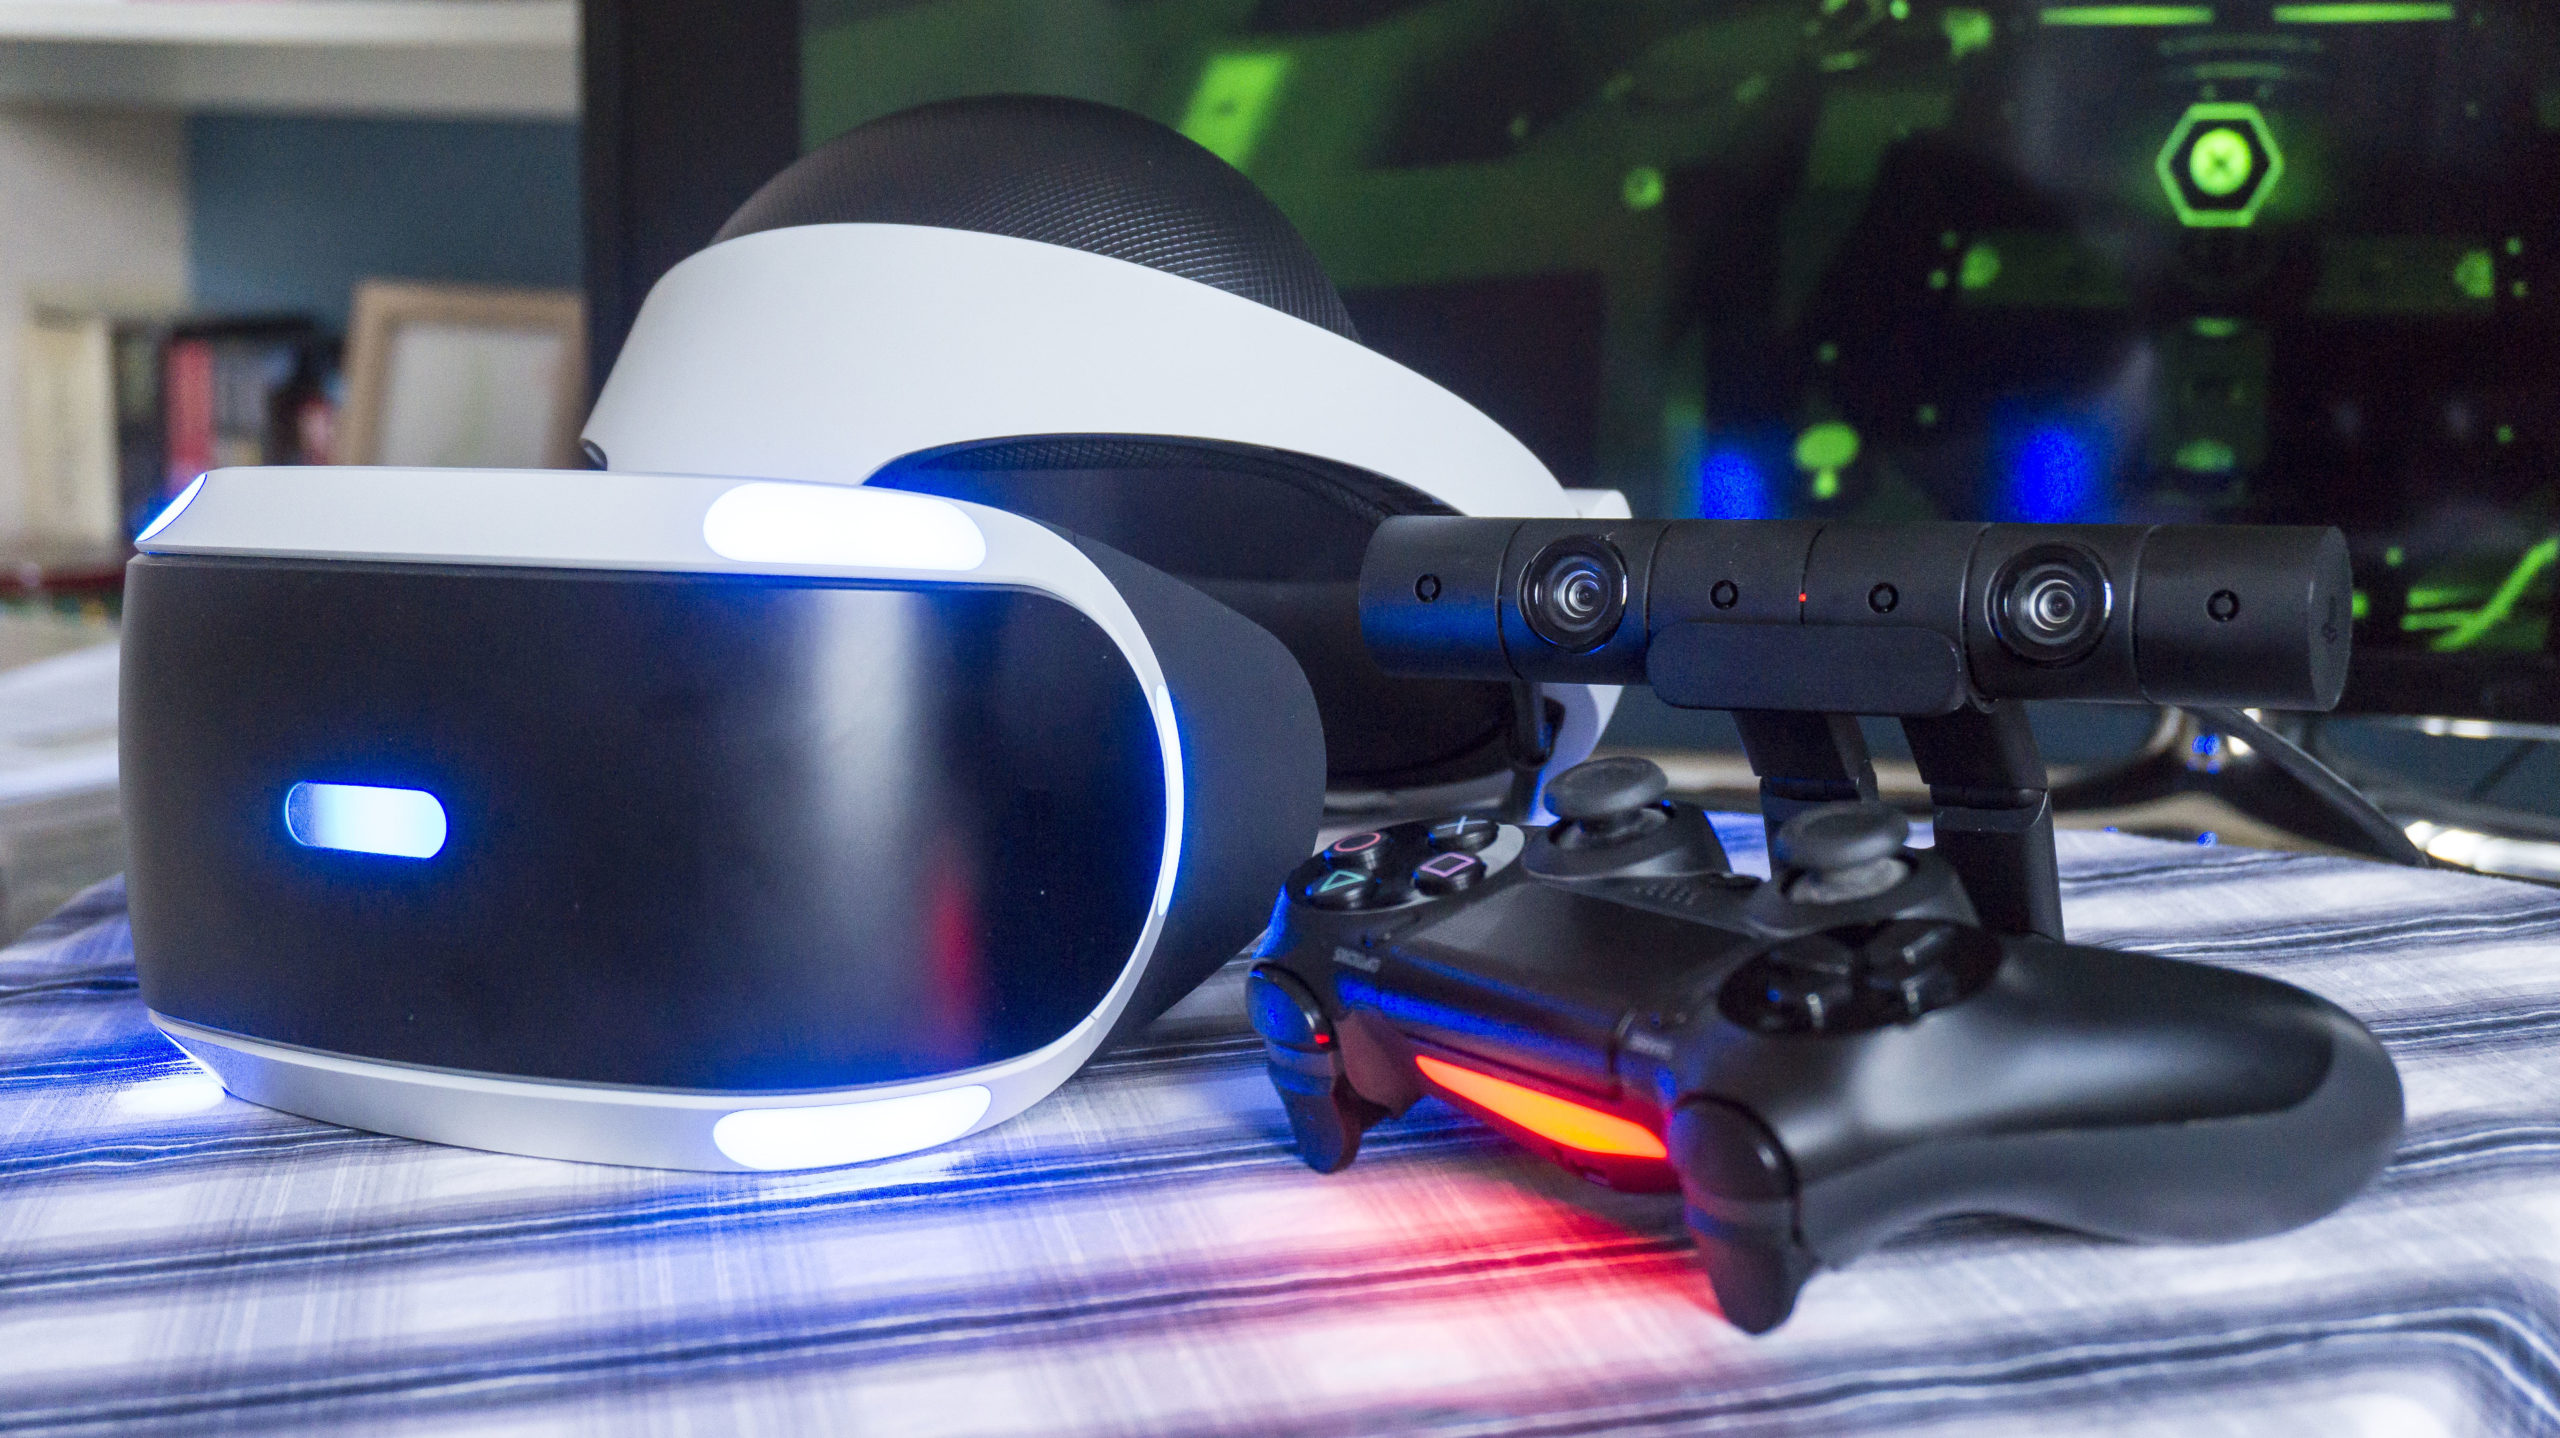 Does PlayStation 4 Pro really improve virtual reality performance?, Games